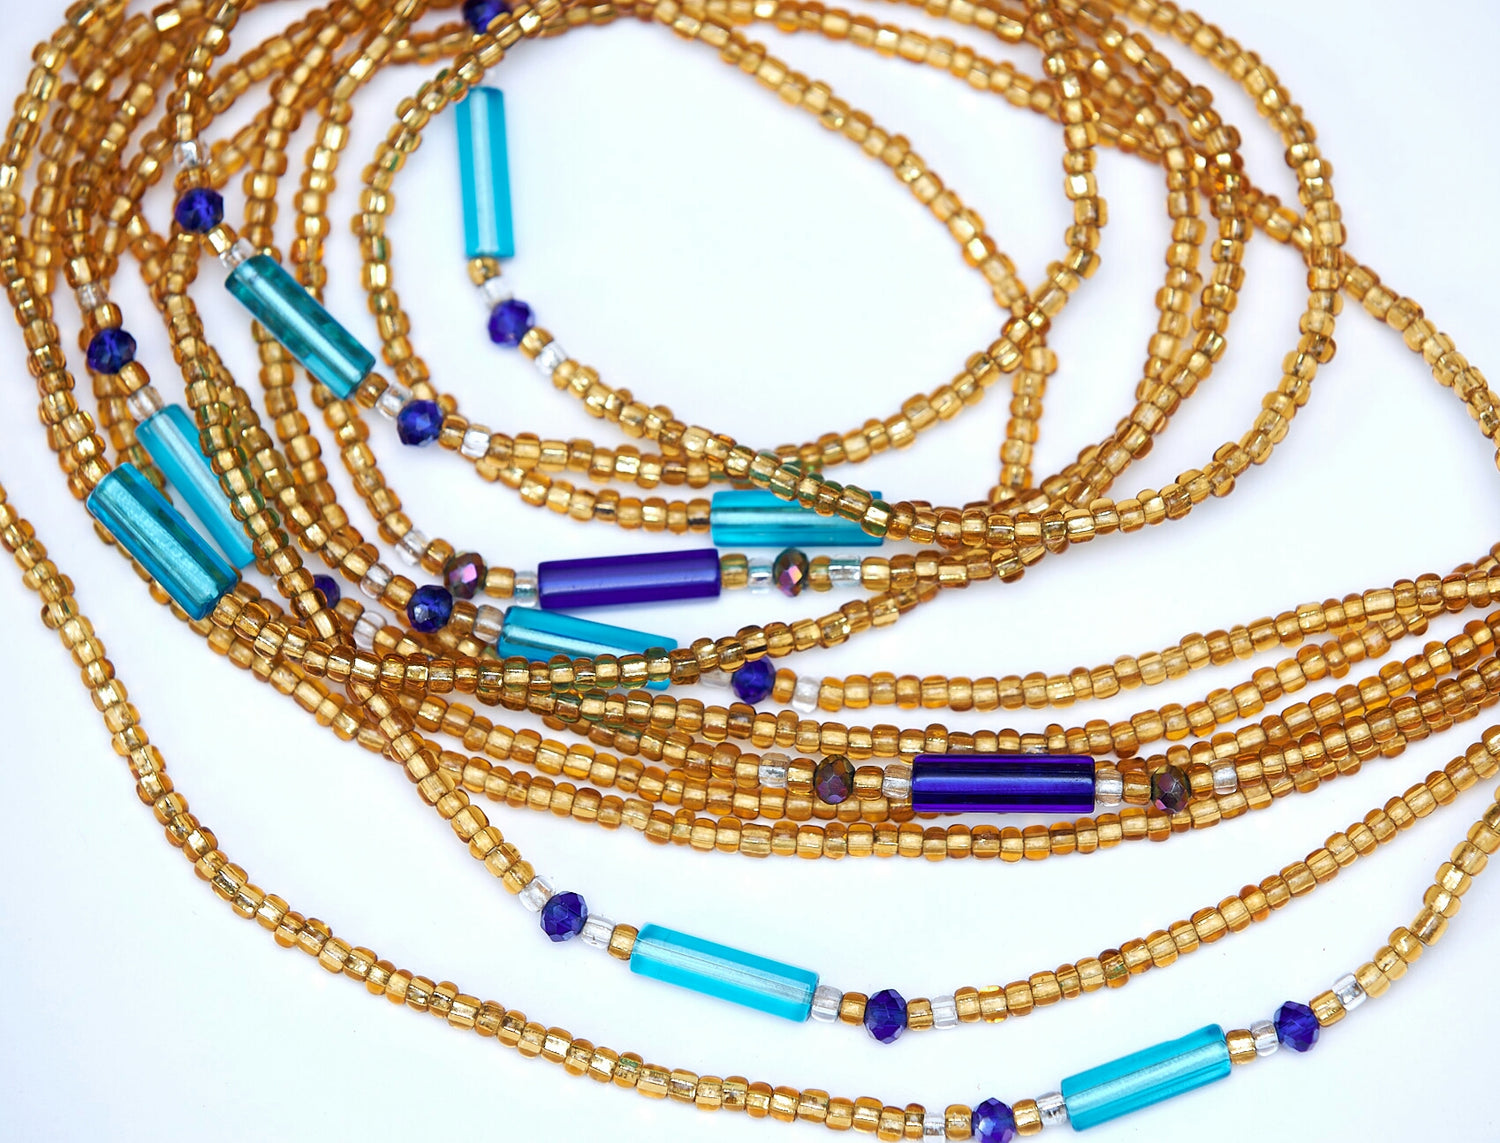 46 Inches Gold Beads With Deep Blue And Sea Blue Pebble Bar Tie On Waist Beads 